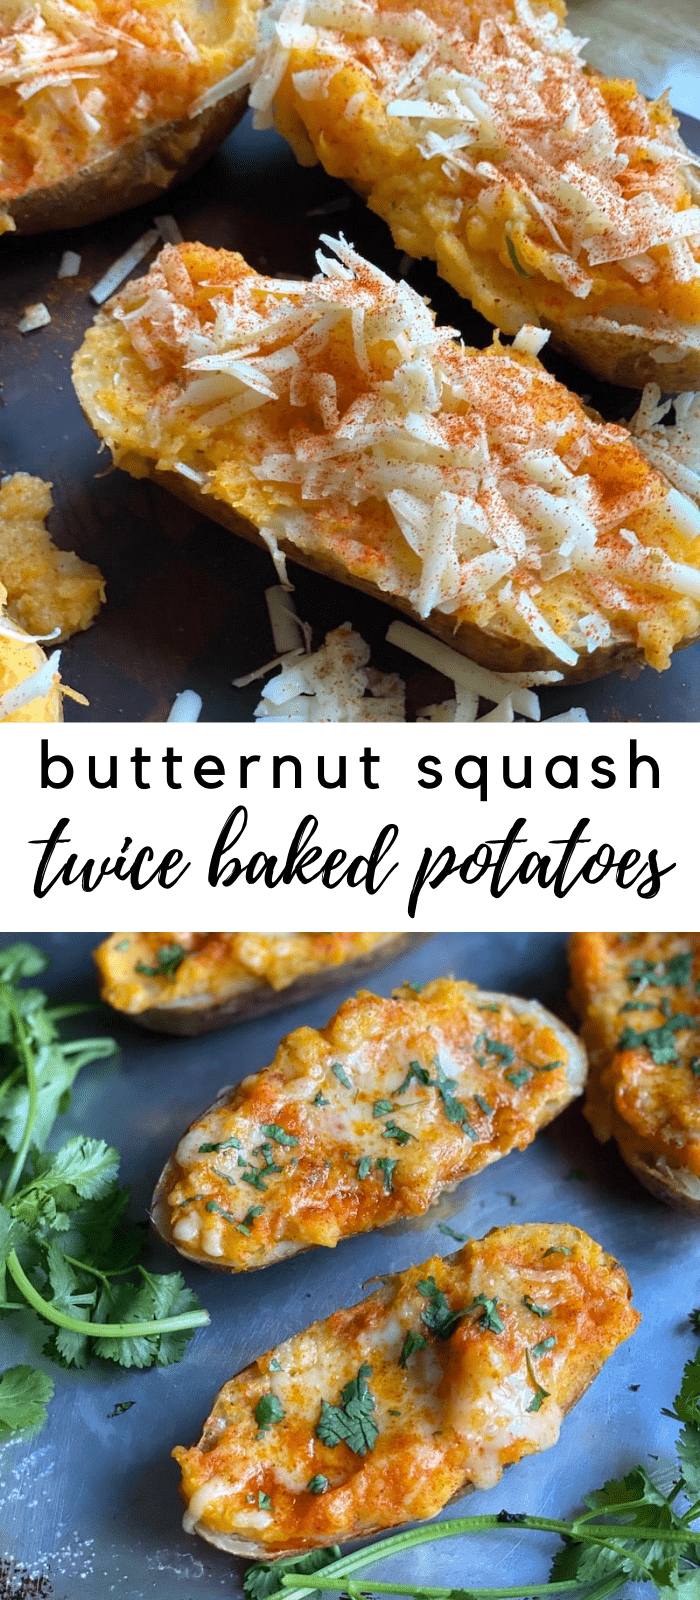  A twist on the classic twice baked potato - adding butternut squash, sharp cheddar and cilantro. It's a little sweet, a little spicy and would be the perfect side dish to your Thanksgiving table. They are 5 points on #teamgreen and #teamblue and 2 points on #teampurple. #potatoes #twicebakedpotatoes #sidedish #makeahead #cheese #butternutsquash